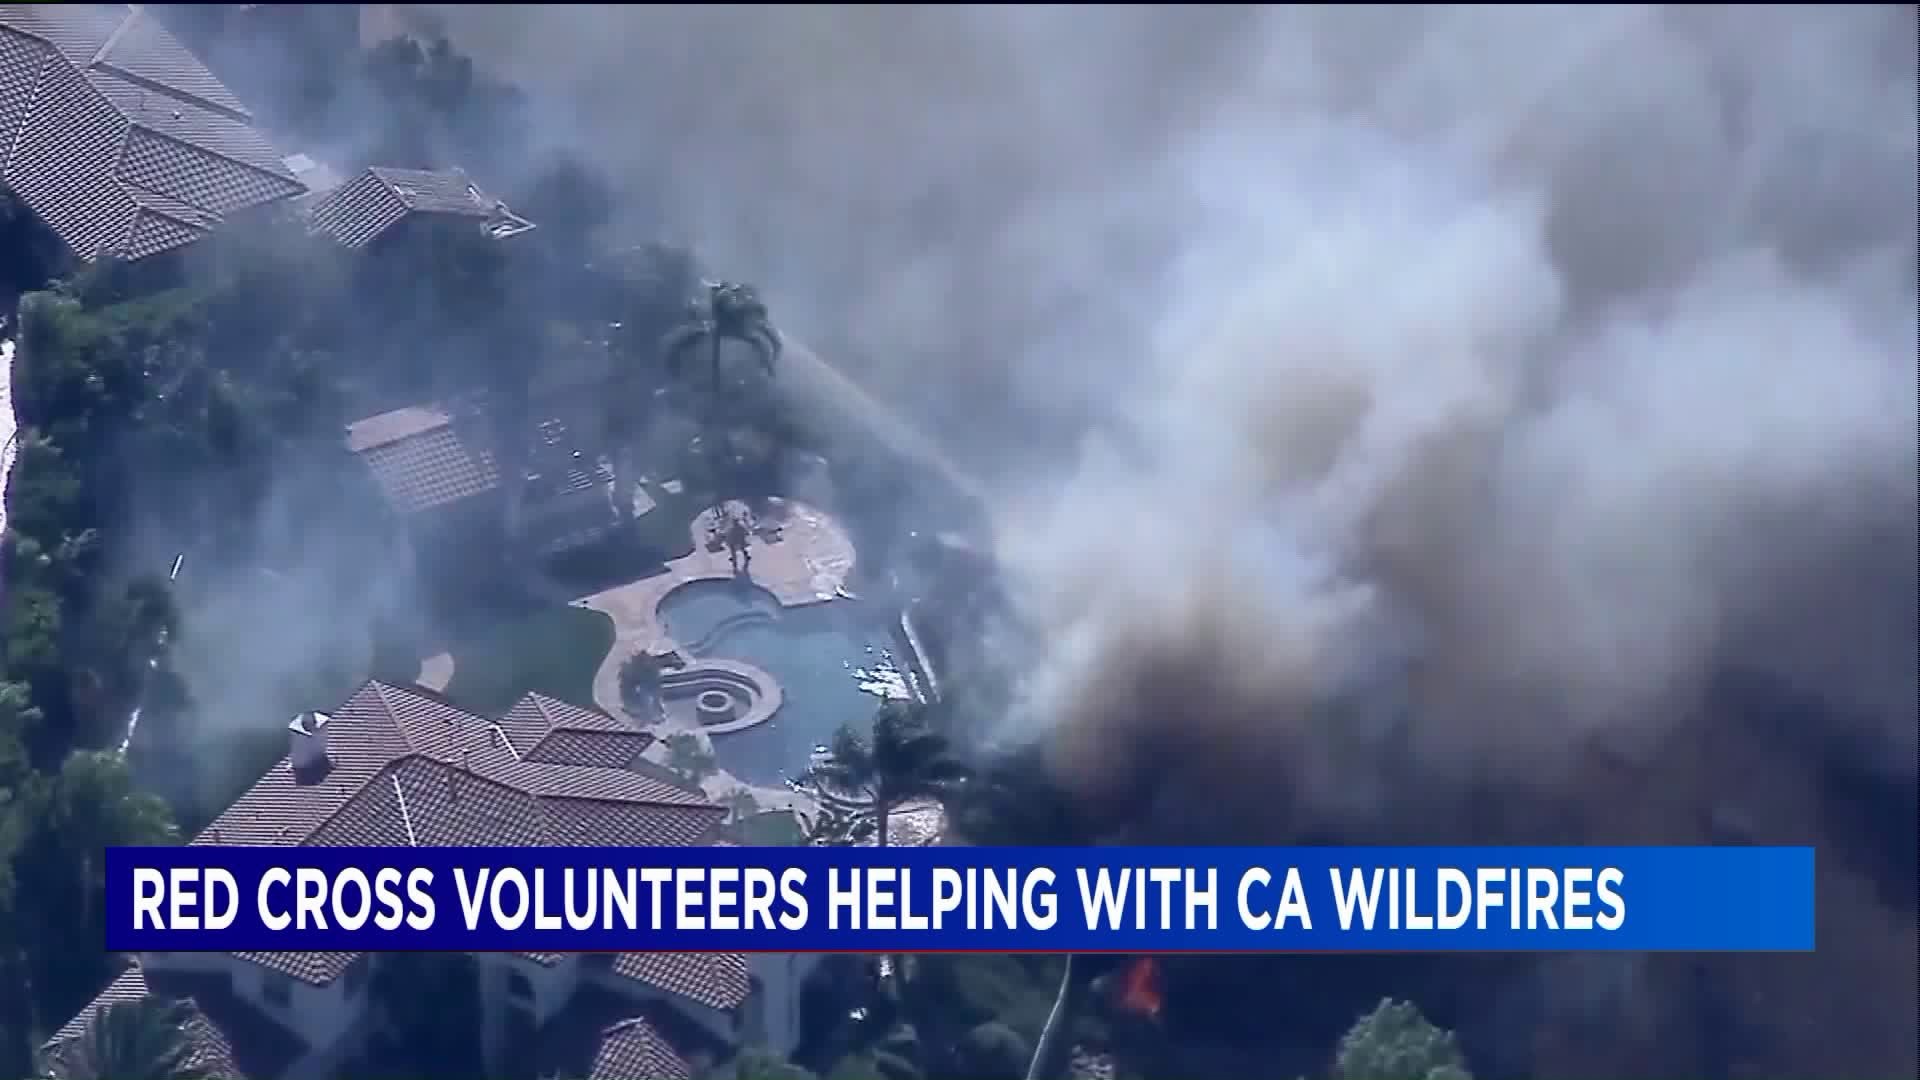 CT volunteers to help victims of California fires